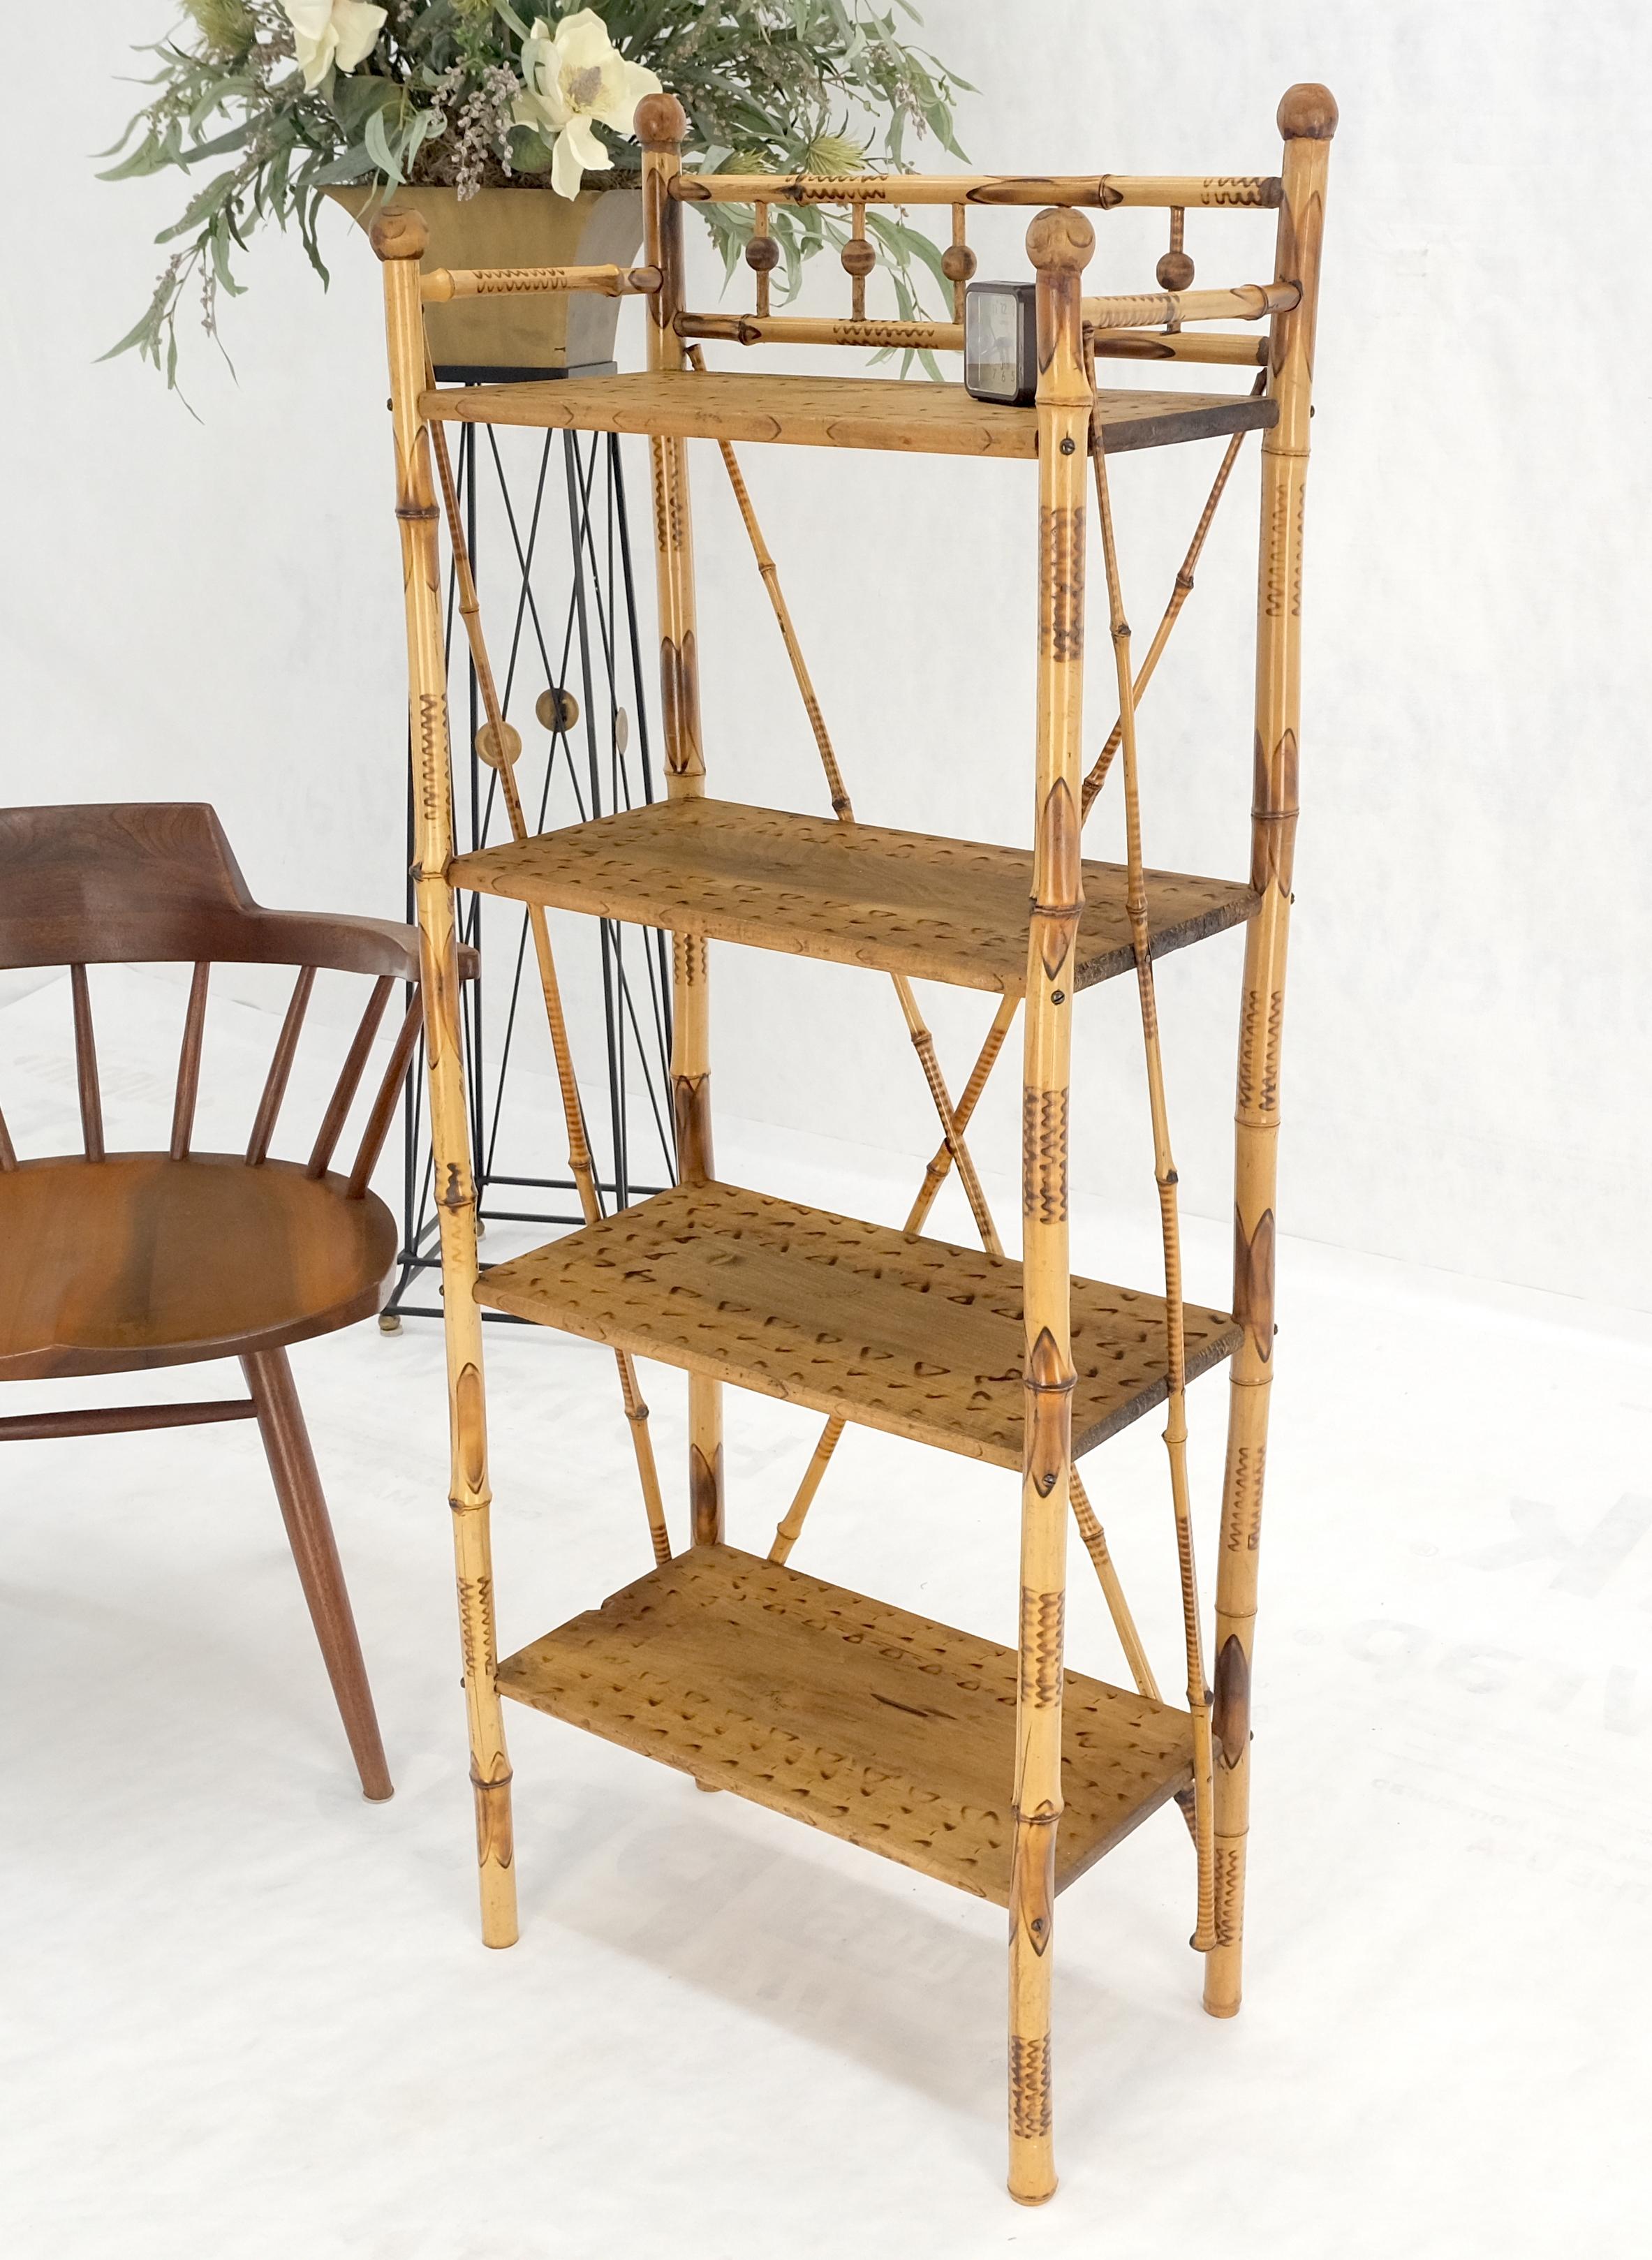 Burnt Bamboo Ball Finials 4 Tier Small Decorative Etagere Shelving Bookcase MINT For Sale 5